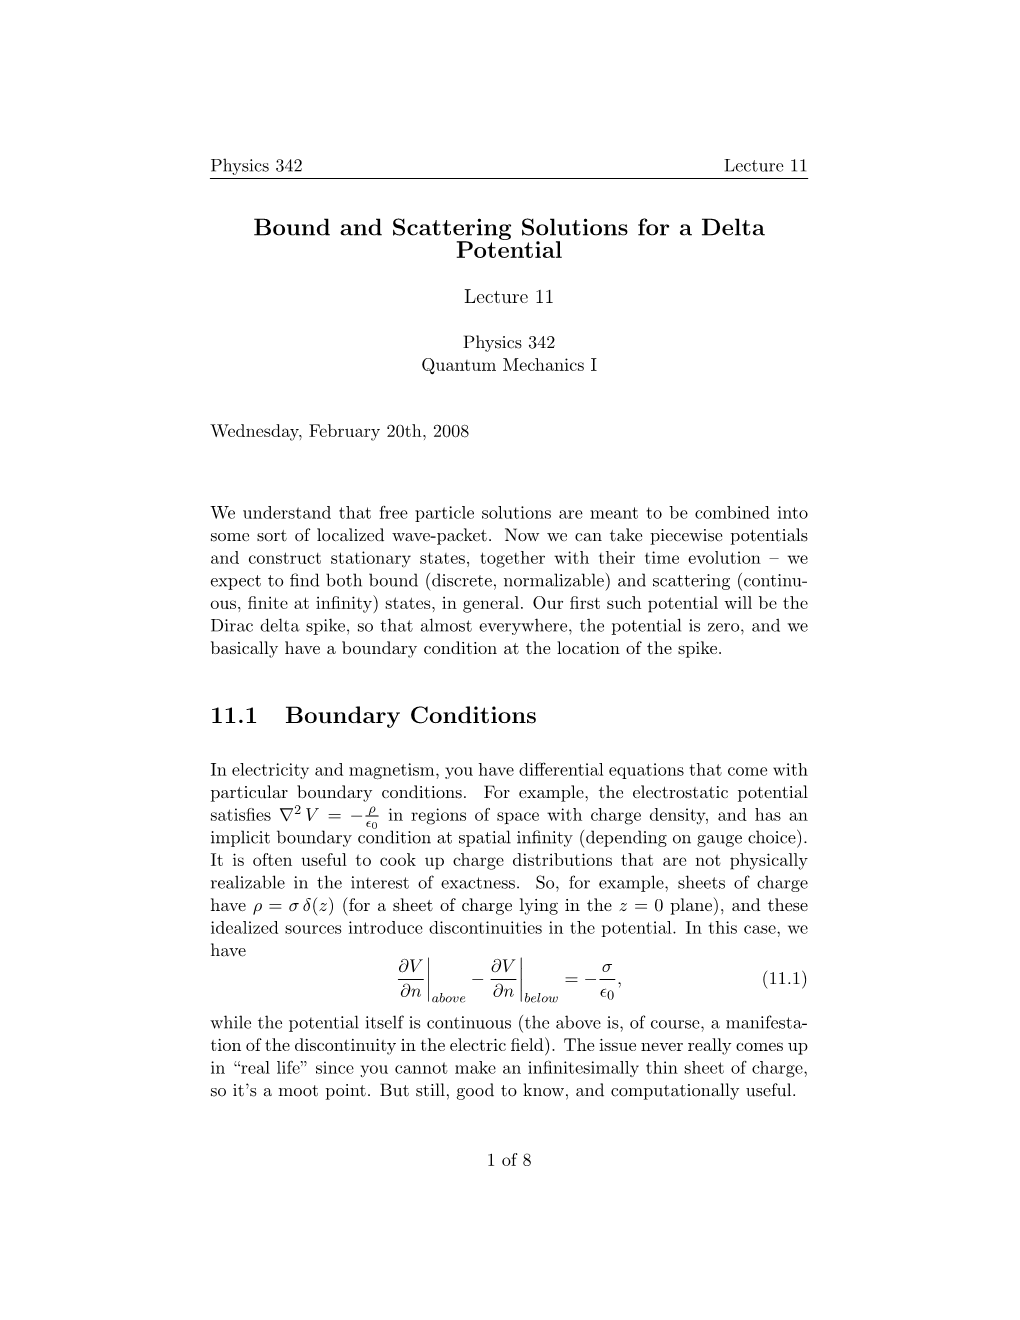 Bound and Scattering Solutions for a Delta Potential 11.1 Boundary Conditions